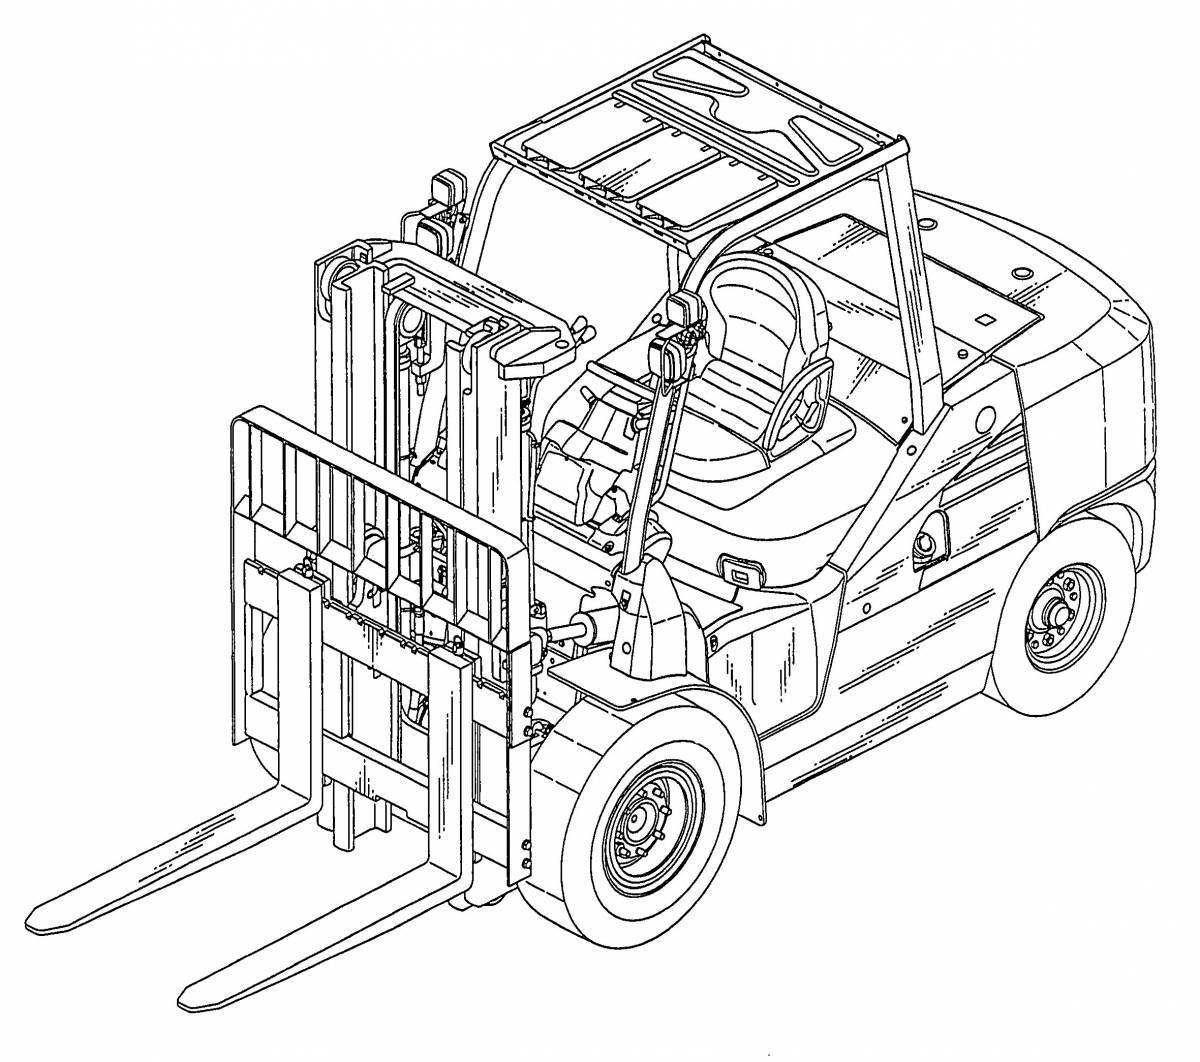 Coloring book cute forklift